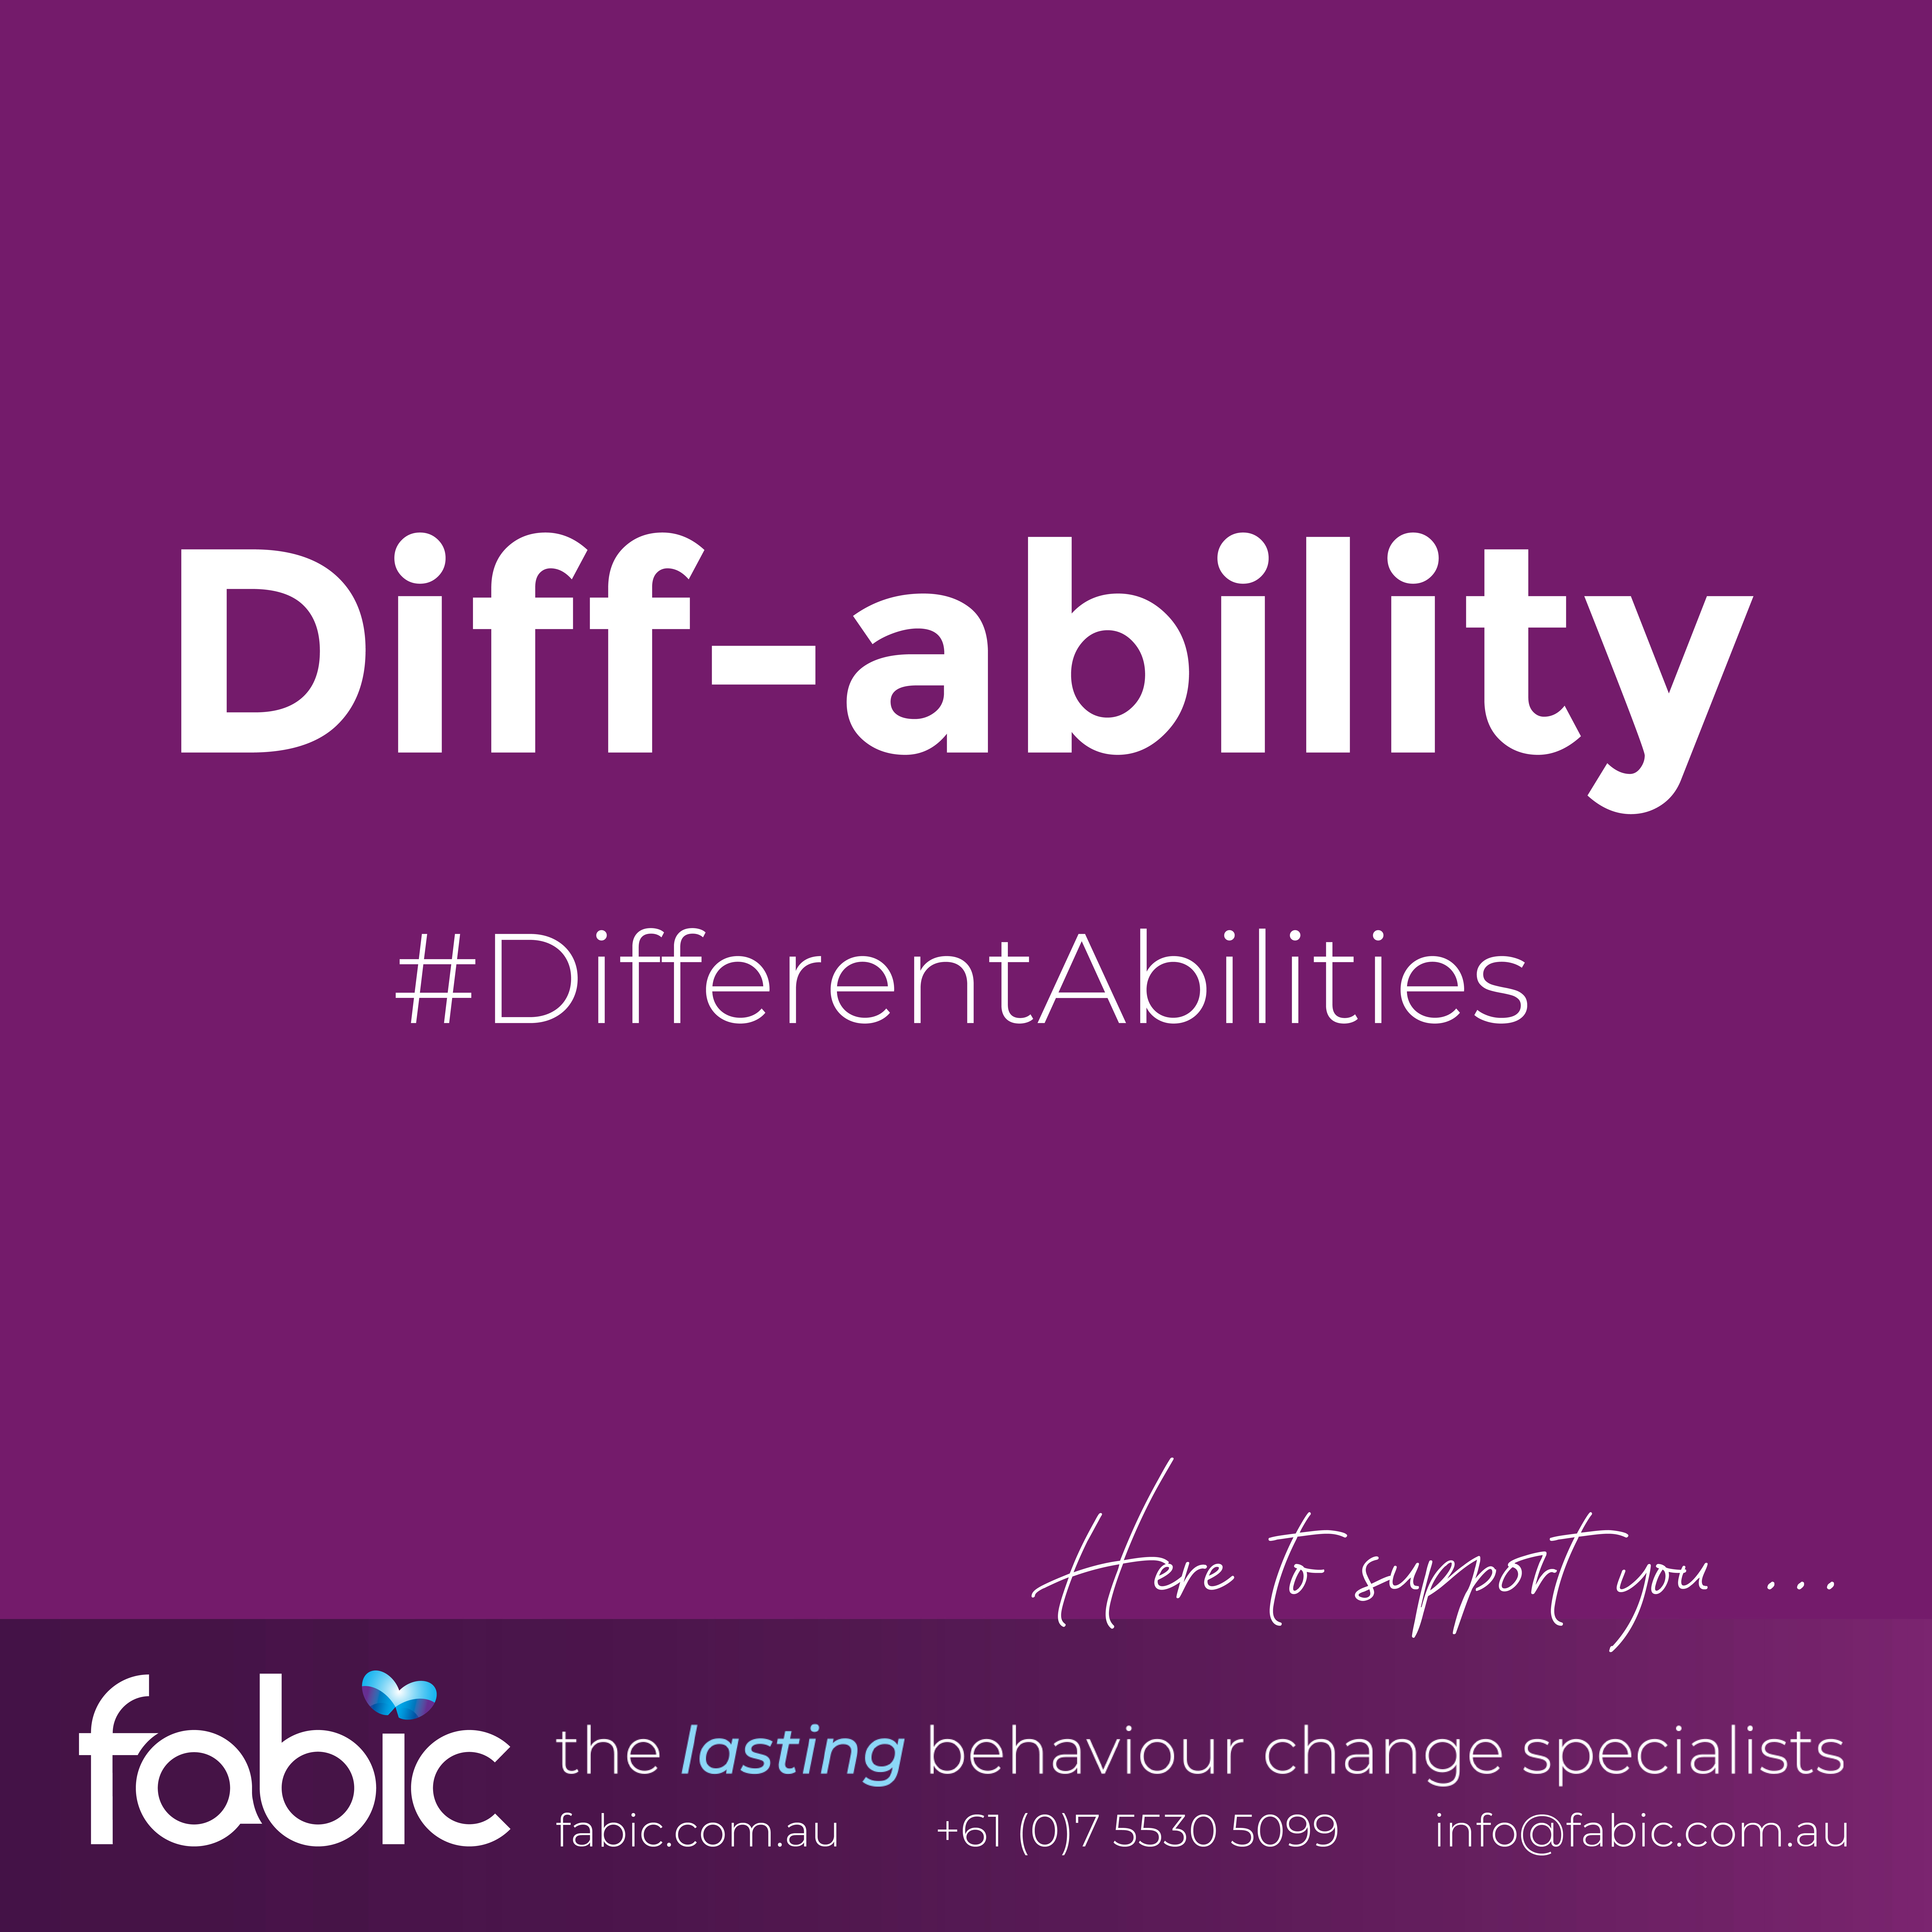 FABIC Diff-ability (Different Abilities)